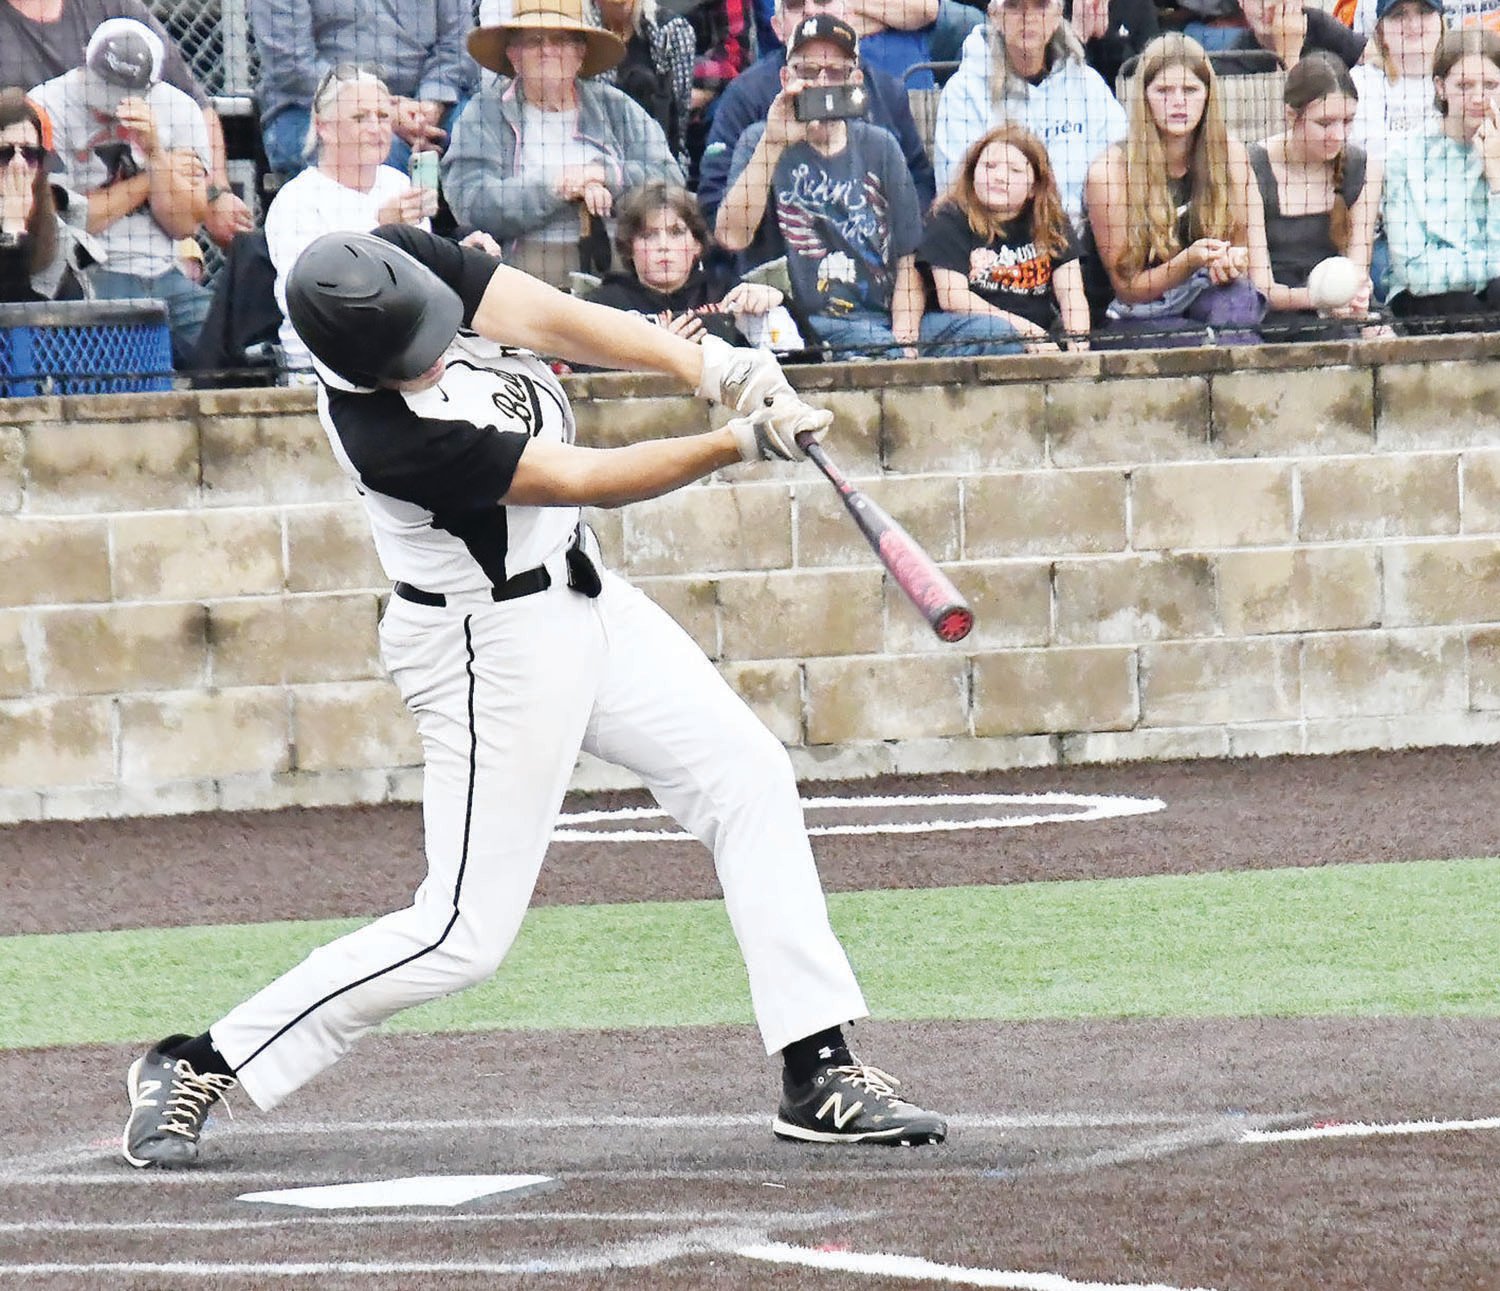 Here's the most memorable photo from the 2022 baseball season, Gage Wilson belts a home run to defeat Northwest (Hughesville), 7-6, during the Class 1 state quarterfinals at General Omar Bradley Field in Moberly on May 25.